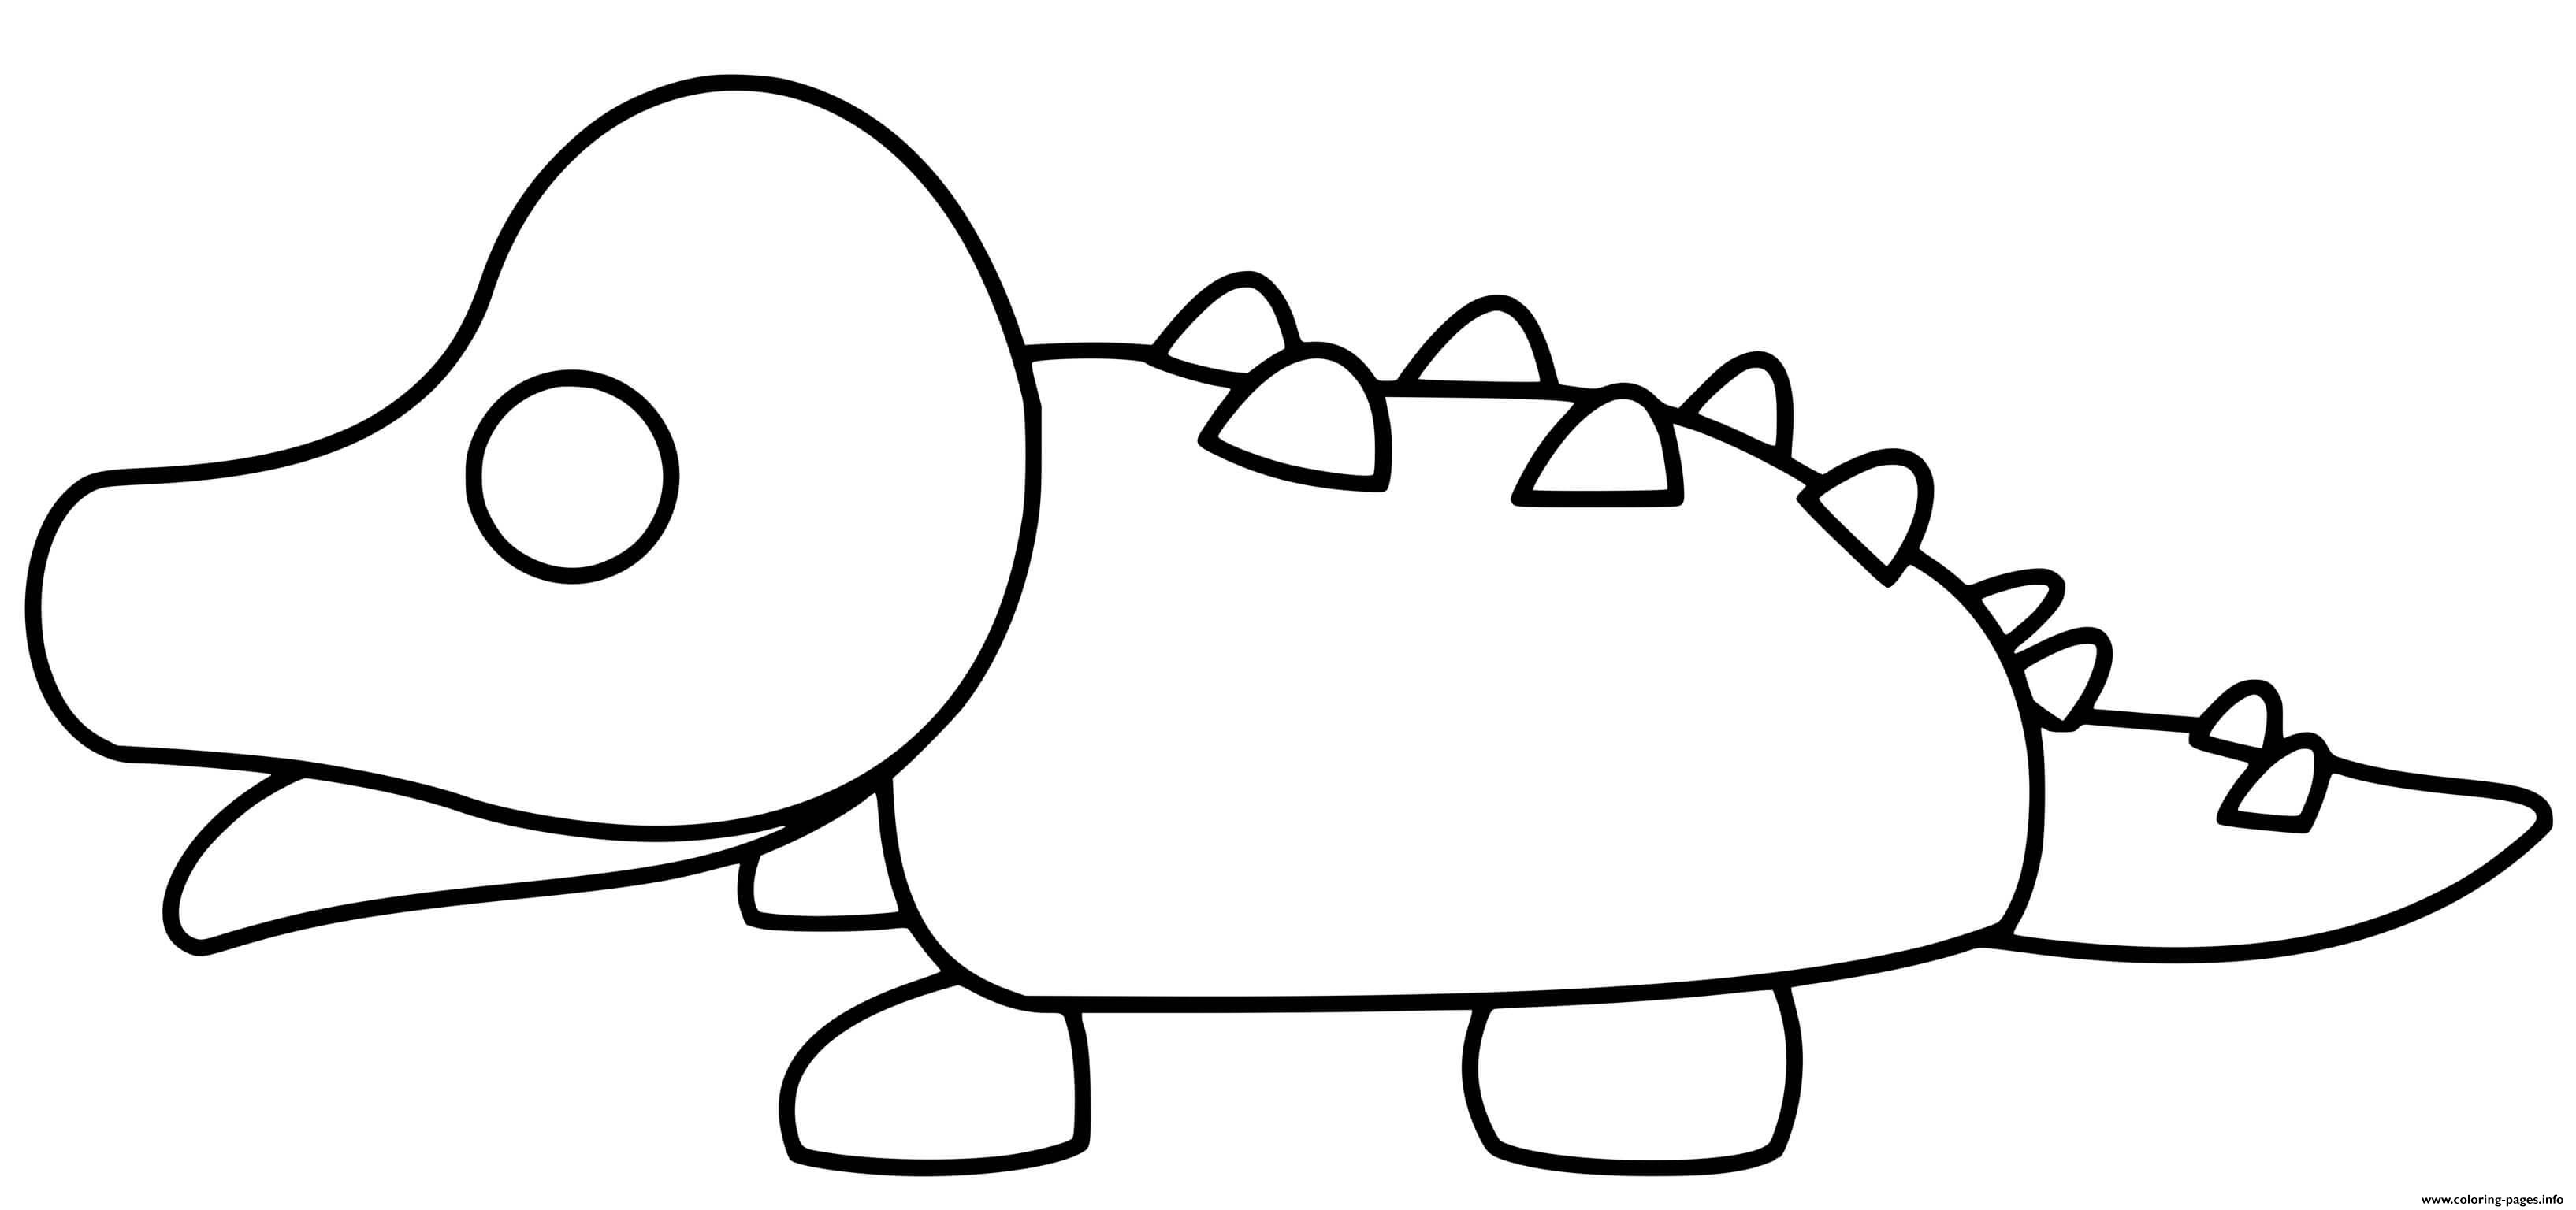 Roblox Adopt Me Crocodile Coloring Pages Printable - dragon roblox adopt me coloring pages printable